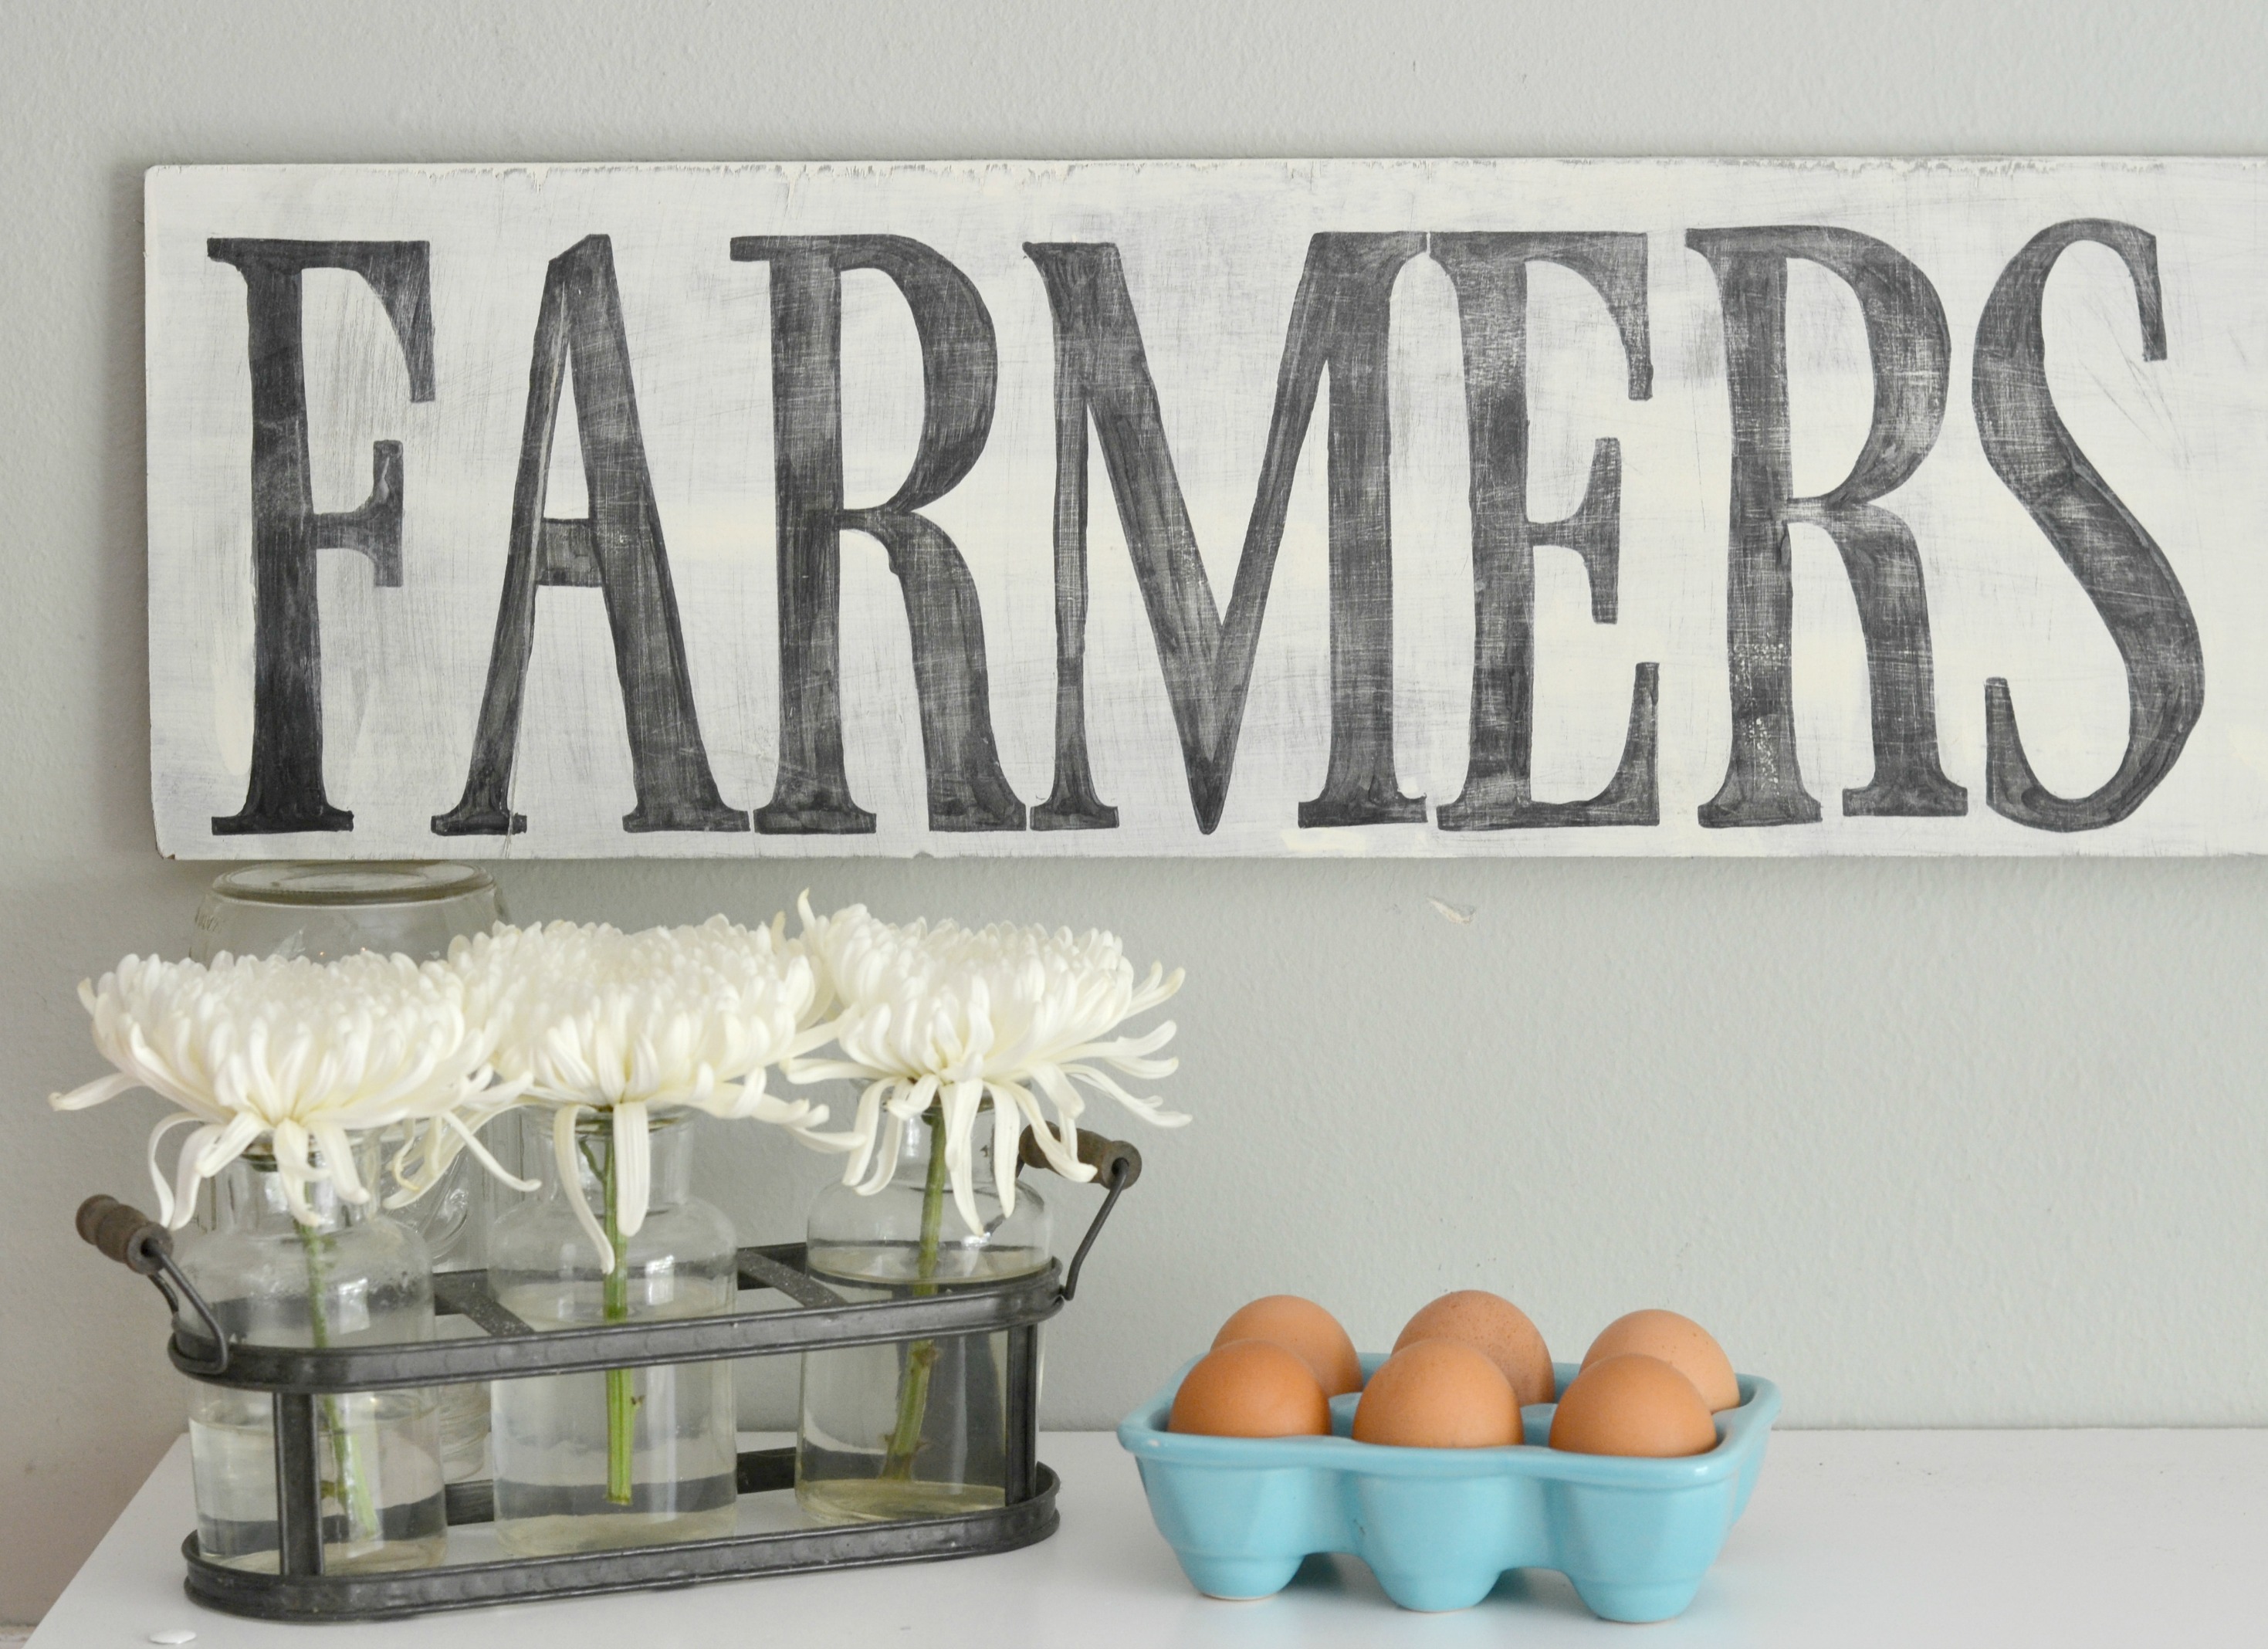 Easy DIY Wooden Sign - this tutorial is very easy to follow. DIY Wooden sign with frame. Rustic wooden sign with saying.